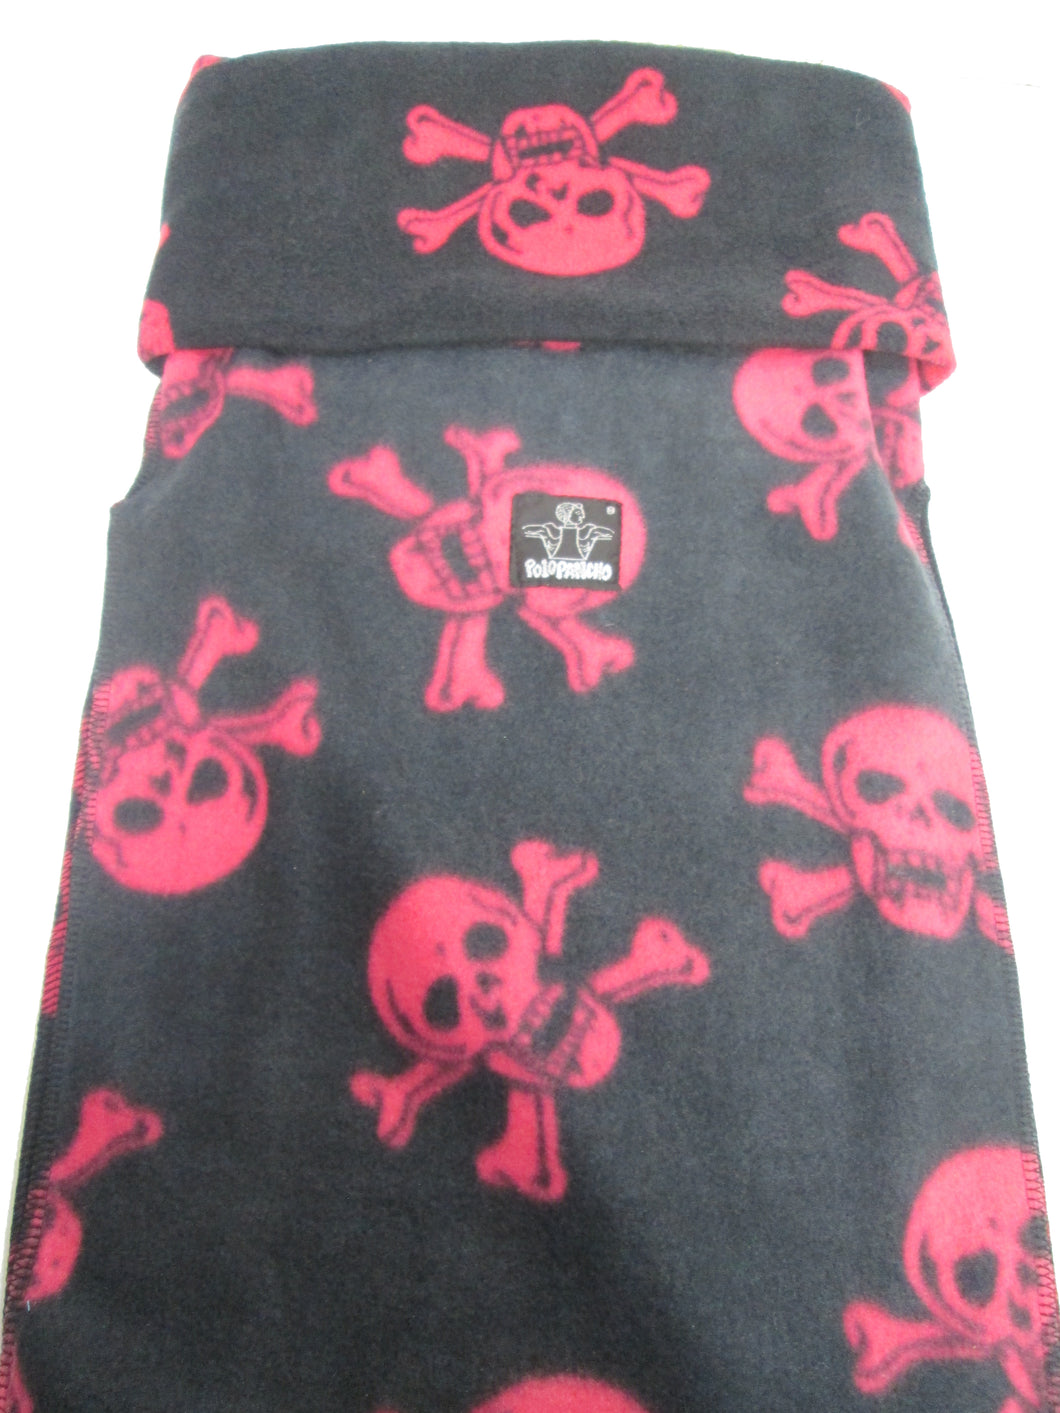 Red Pirate Genuine Polo Pancho Scarf Multi Wear Scarf